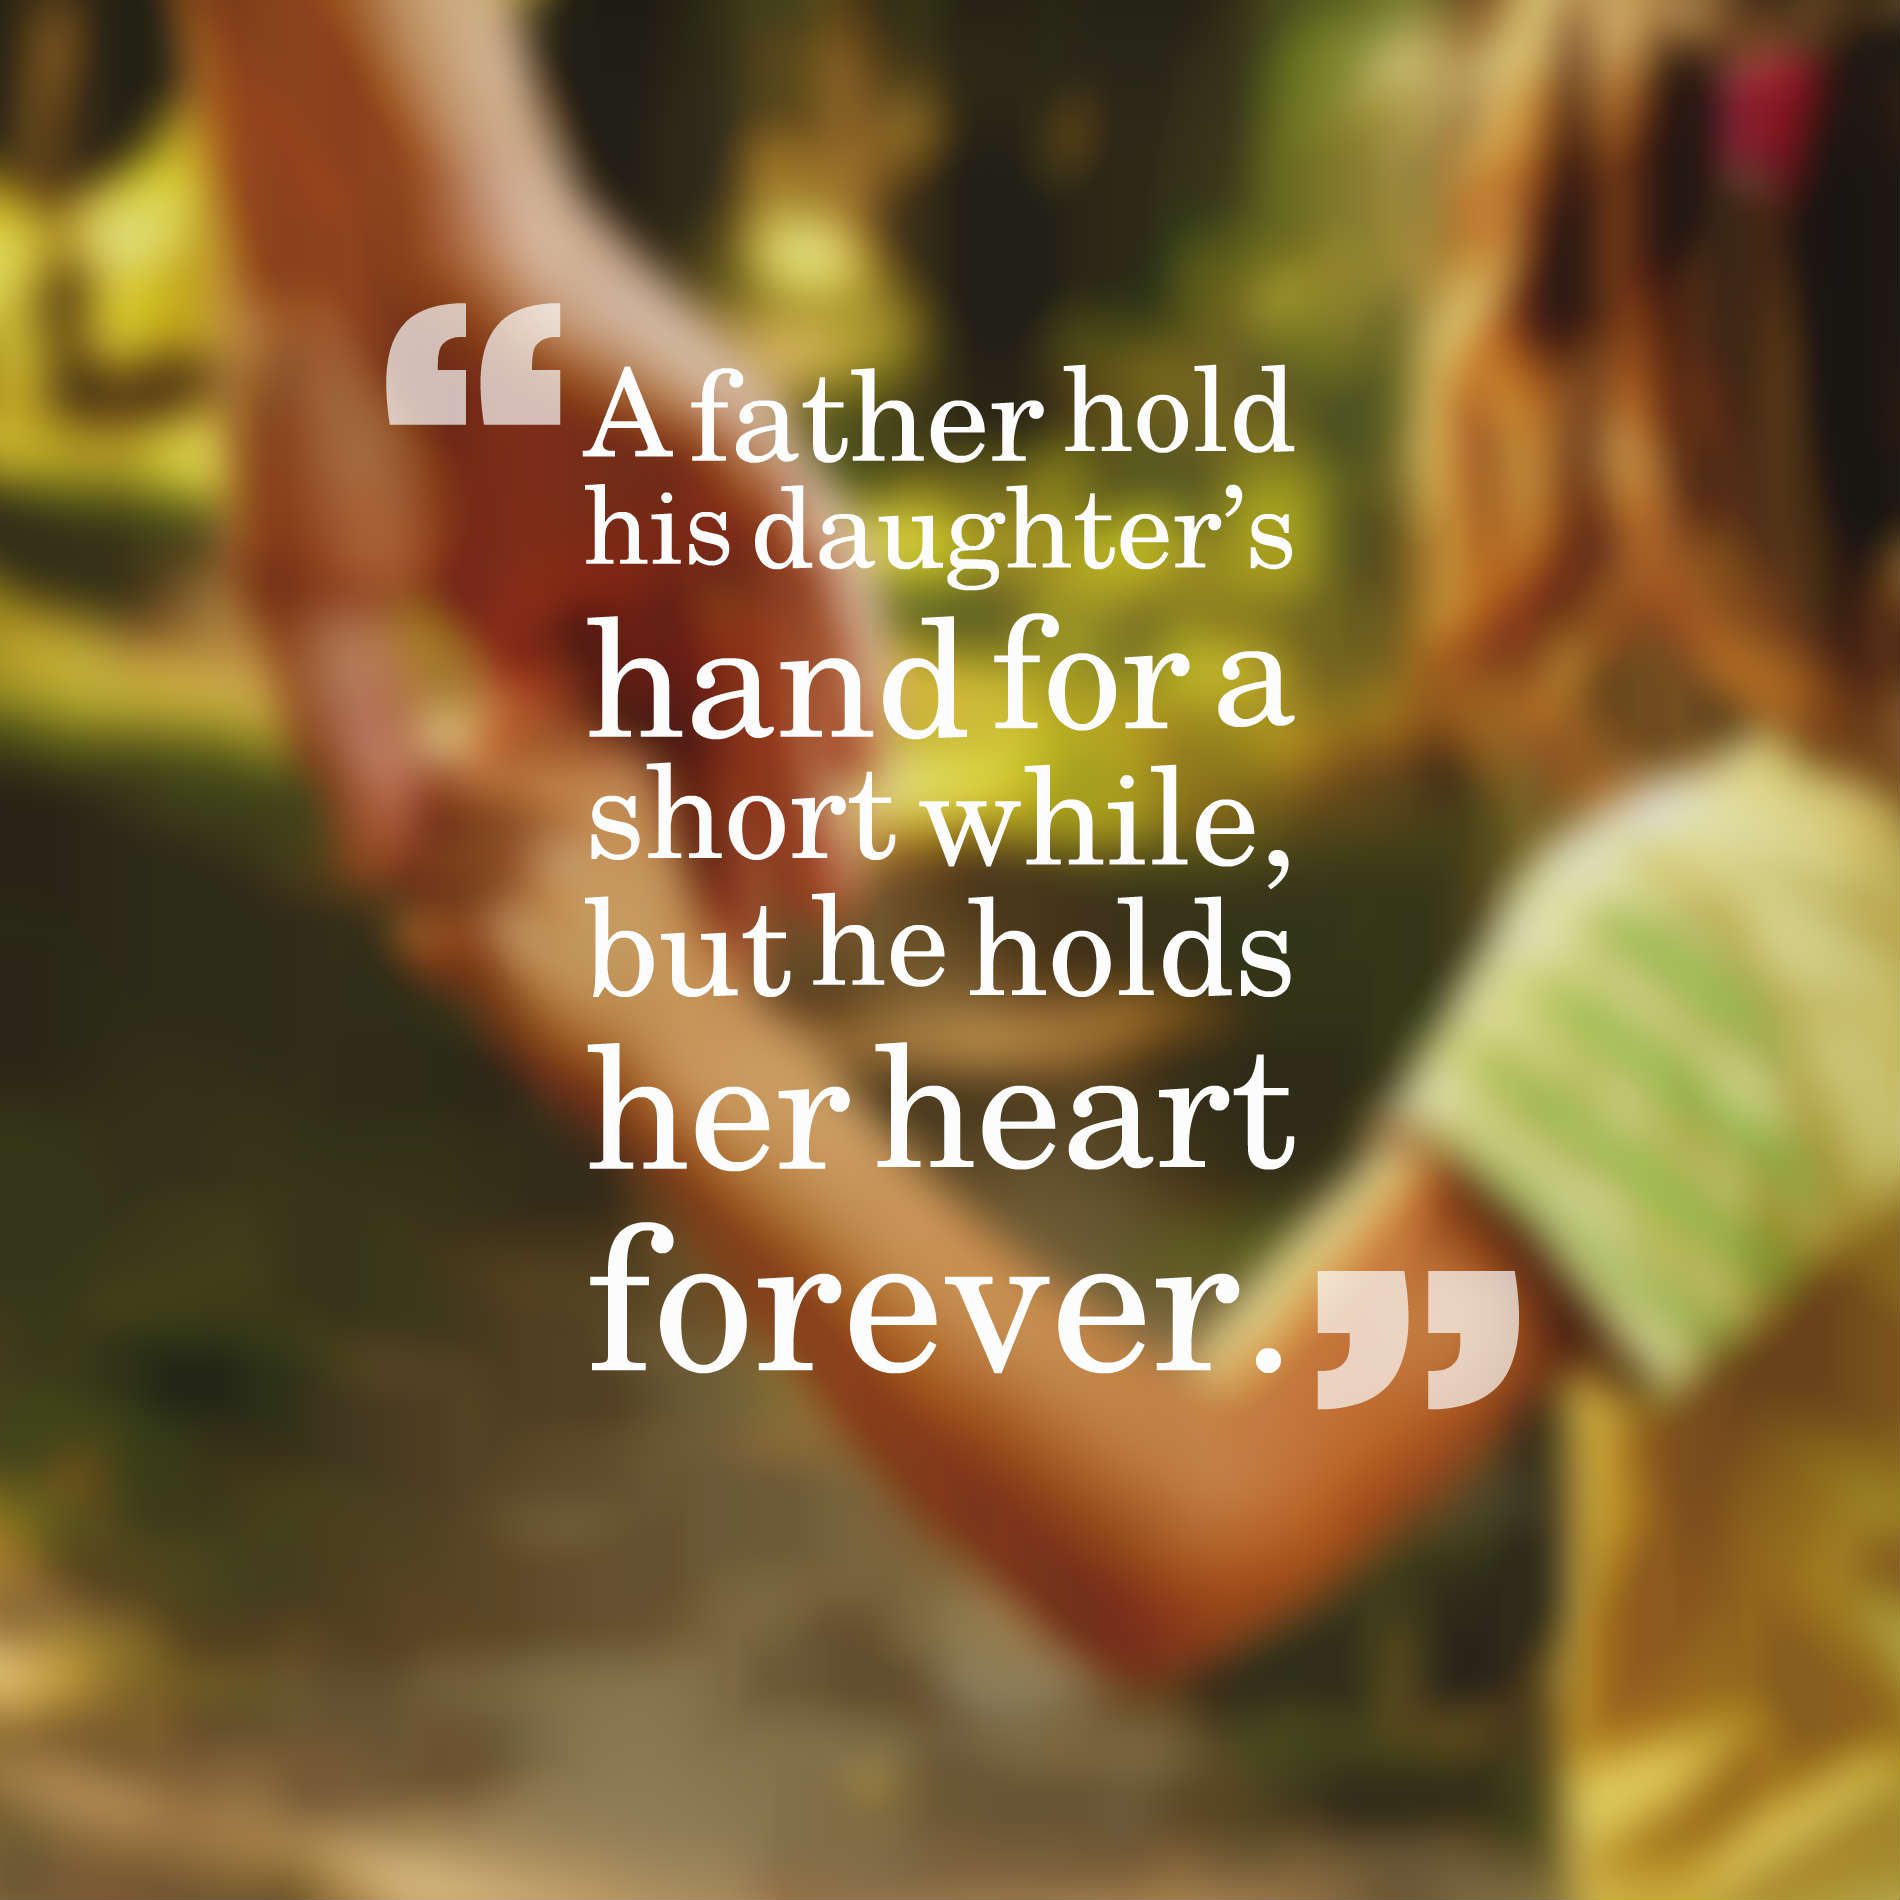 A father hold his daughter’s hand for a short while, but he holds her heart forever.